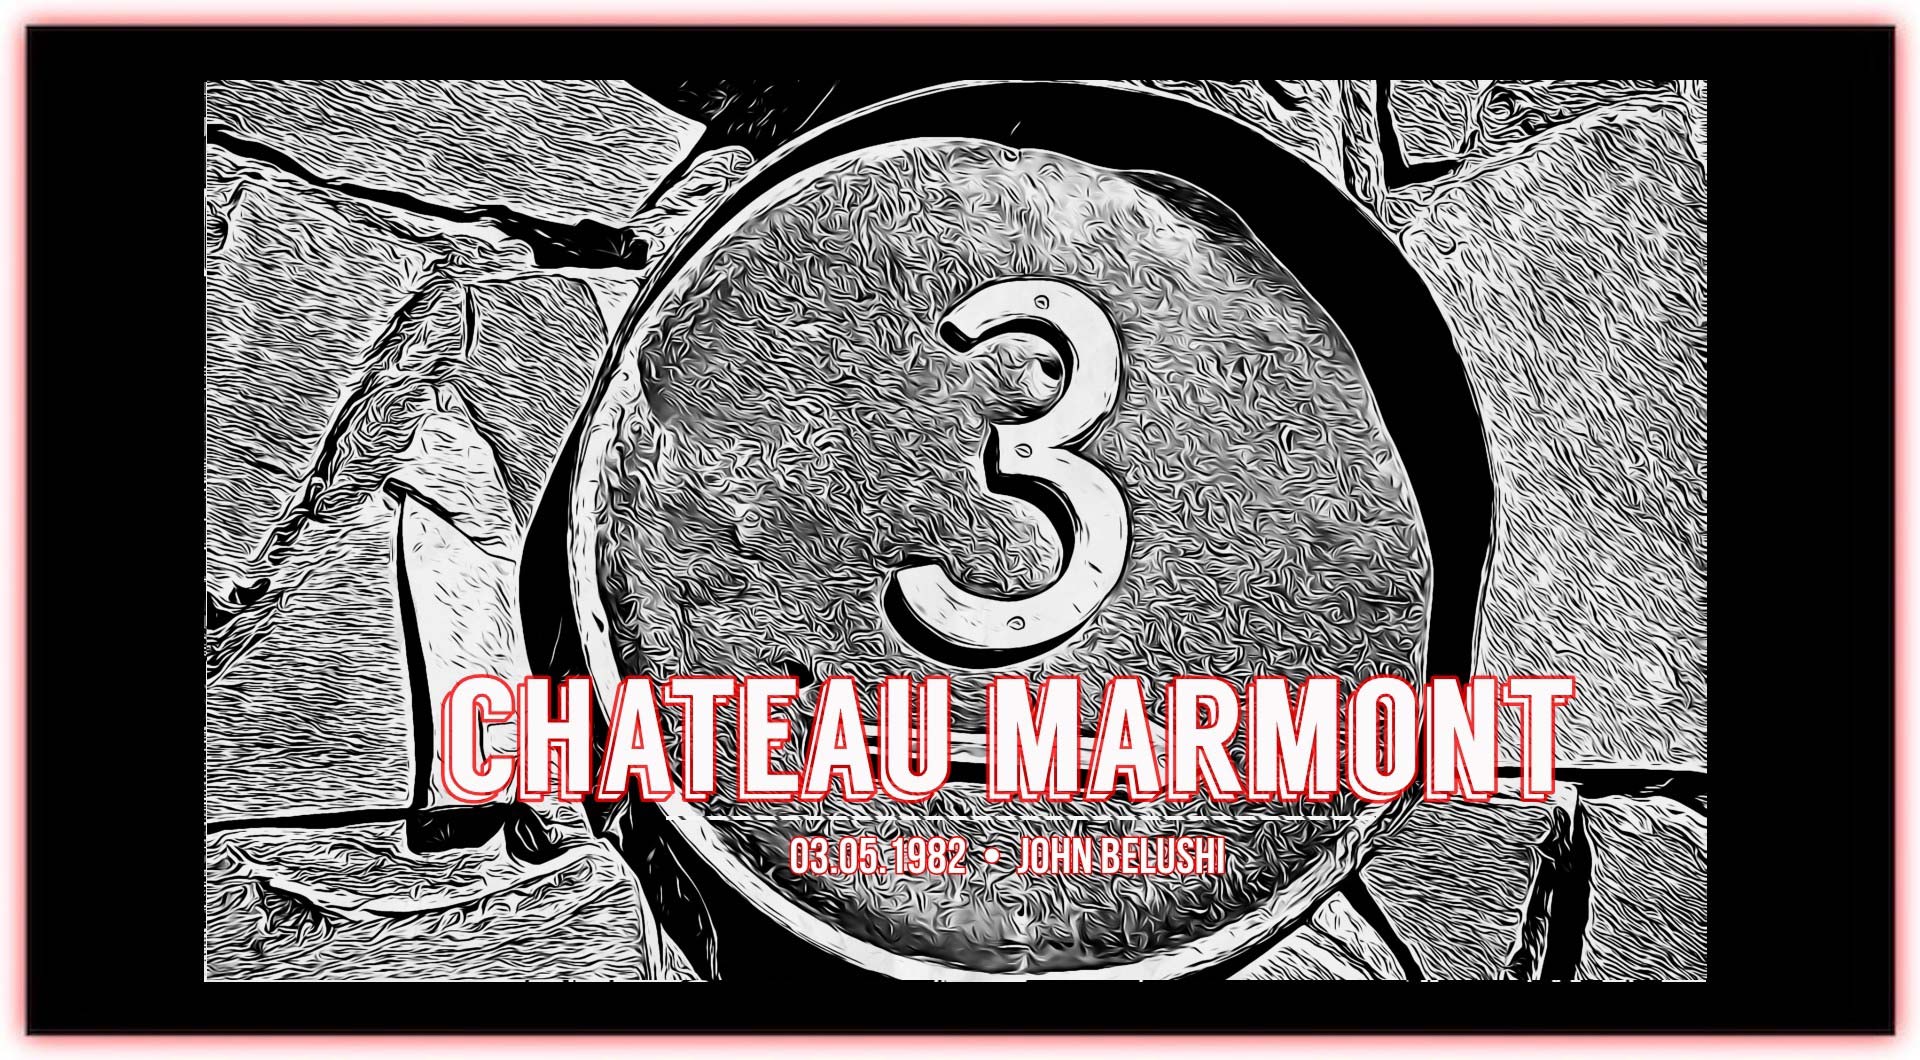 Ep 10 Chateau Marmont Death In Bungalow 3 Death By